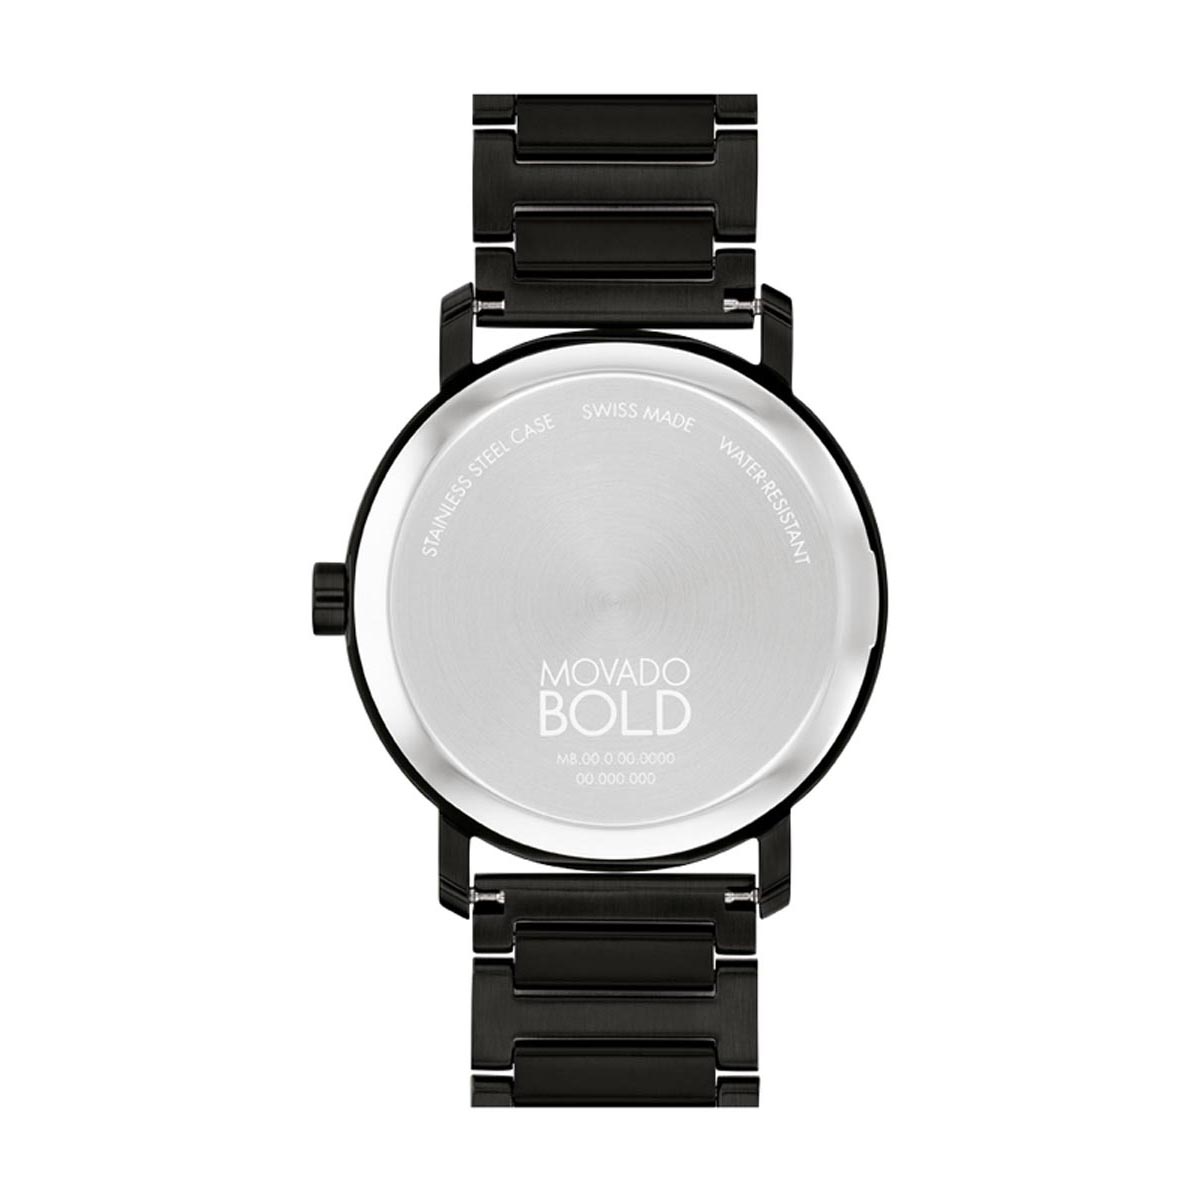 Movado Bold Evolution 2.0 Mens Watch with Black Dial and Black Ion Plated Bracelet (Swiss quartz movement)